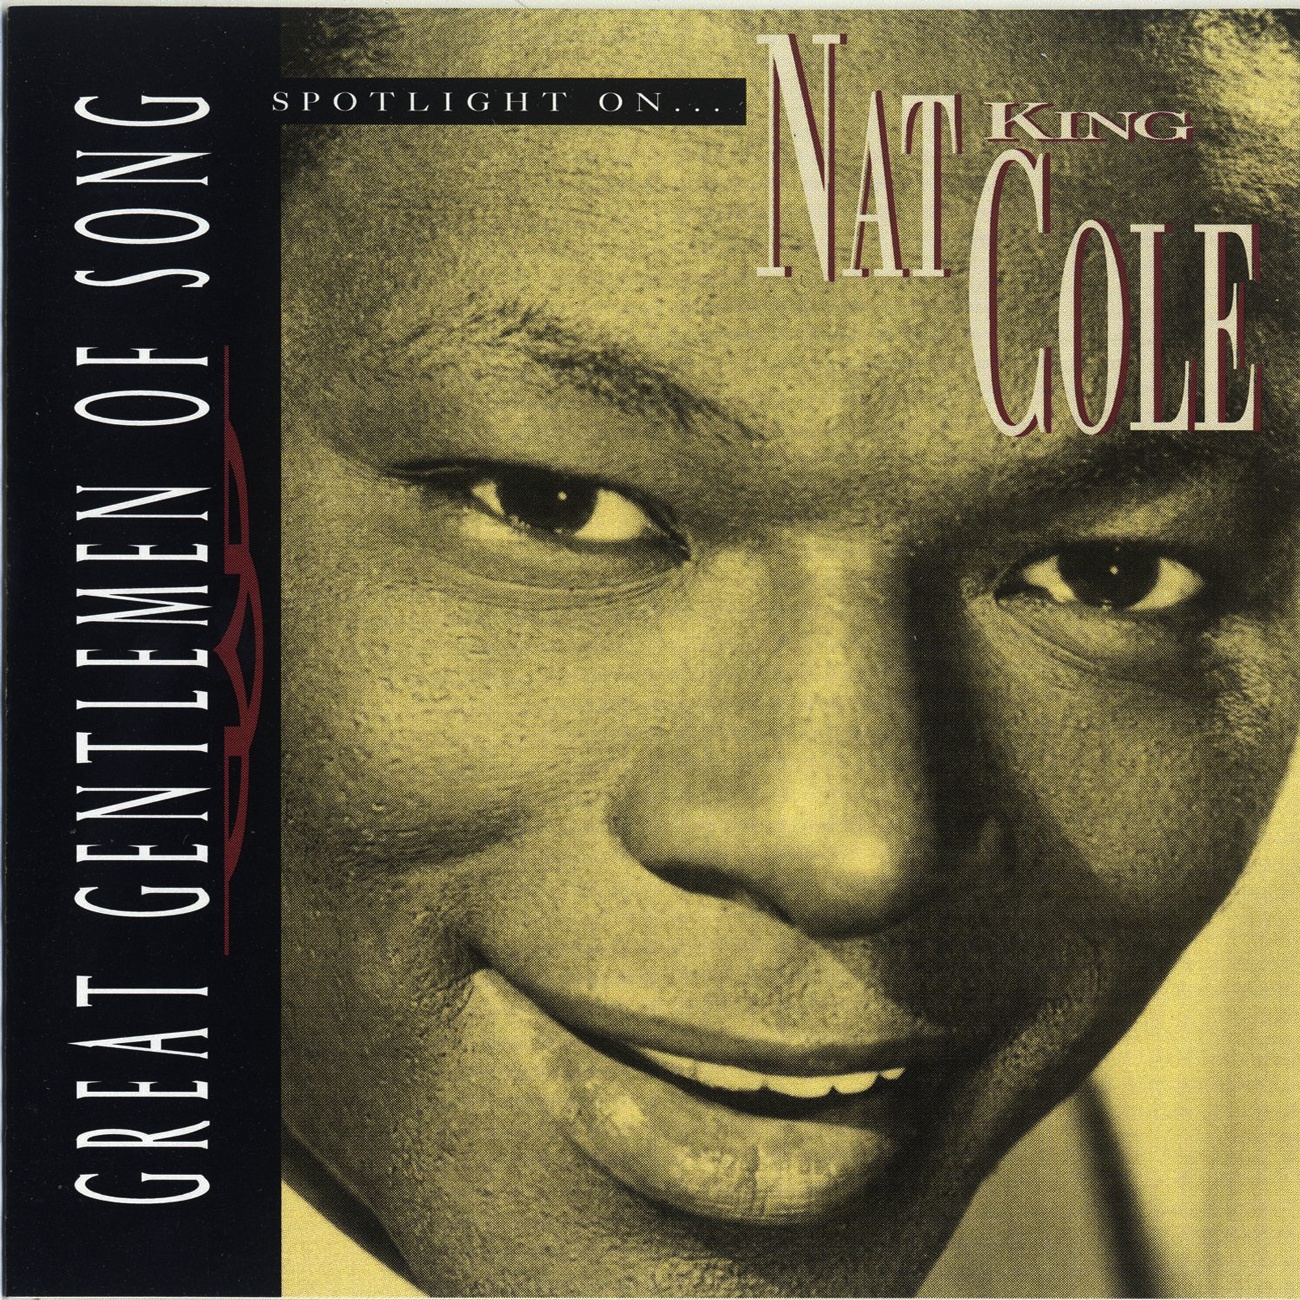 I Remember You (From The Nat King Cole Show) (1995 Digital Remaster)